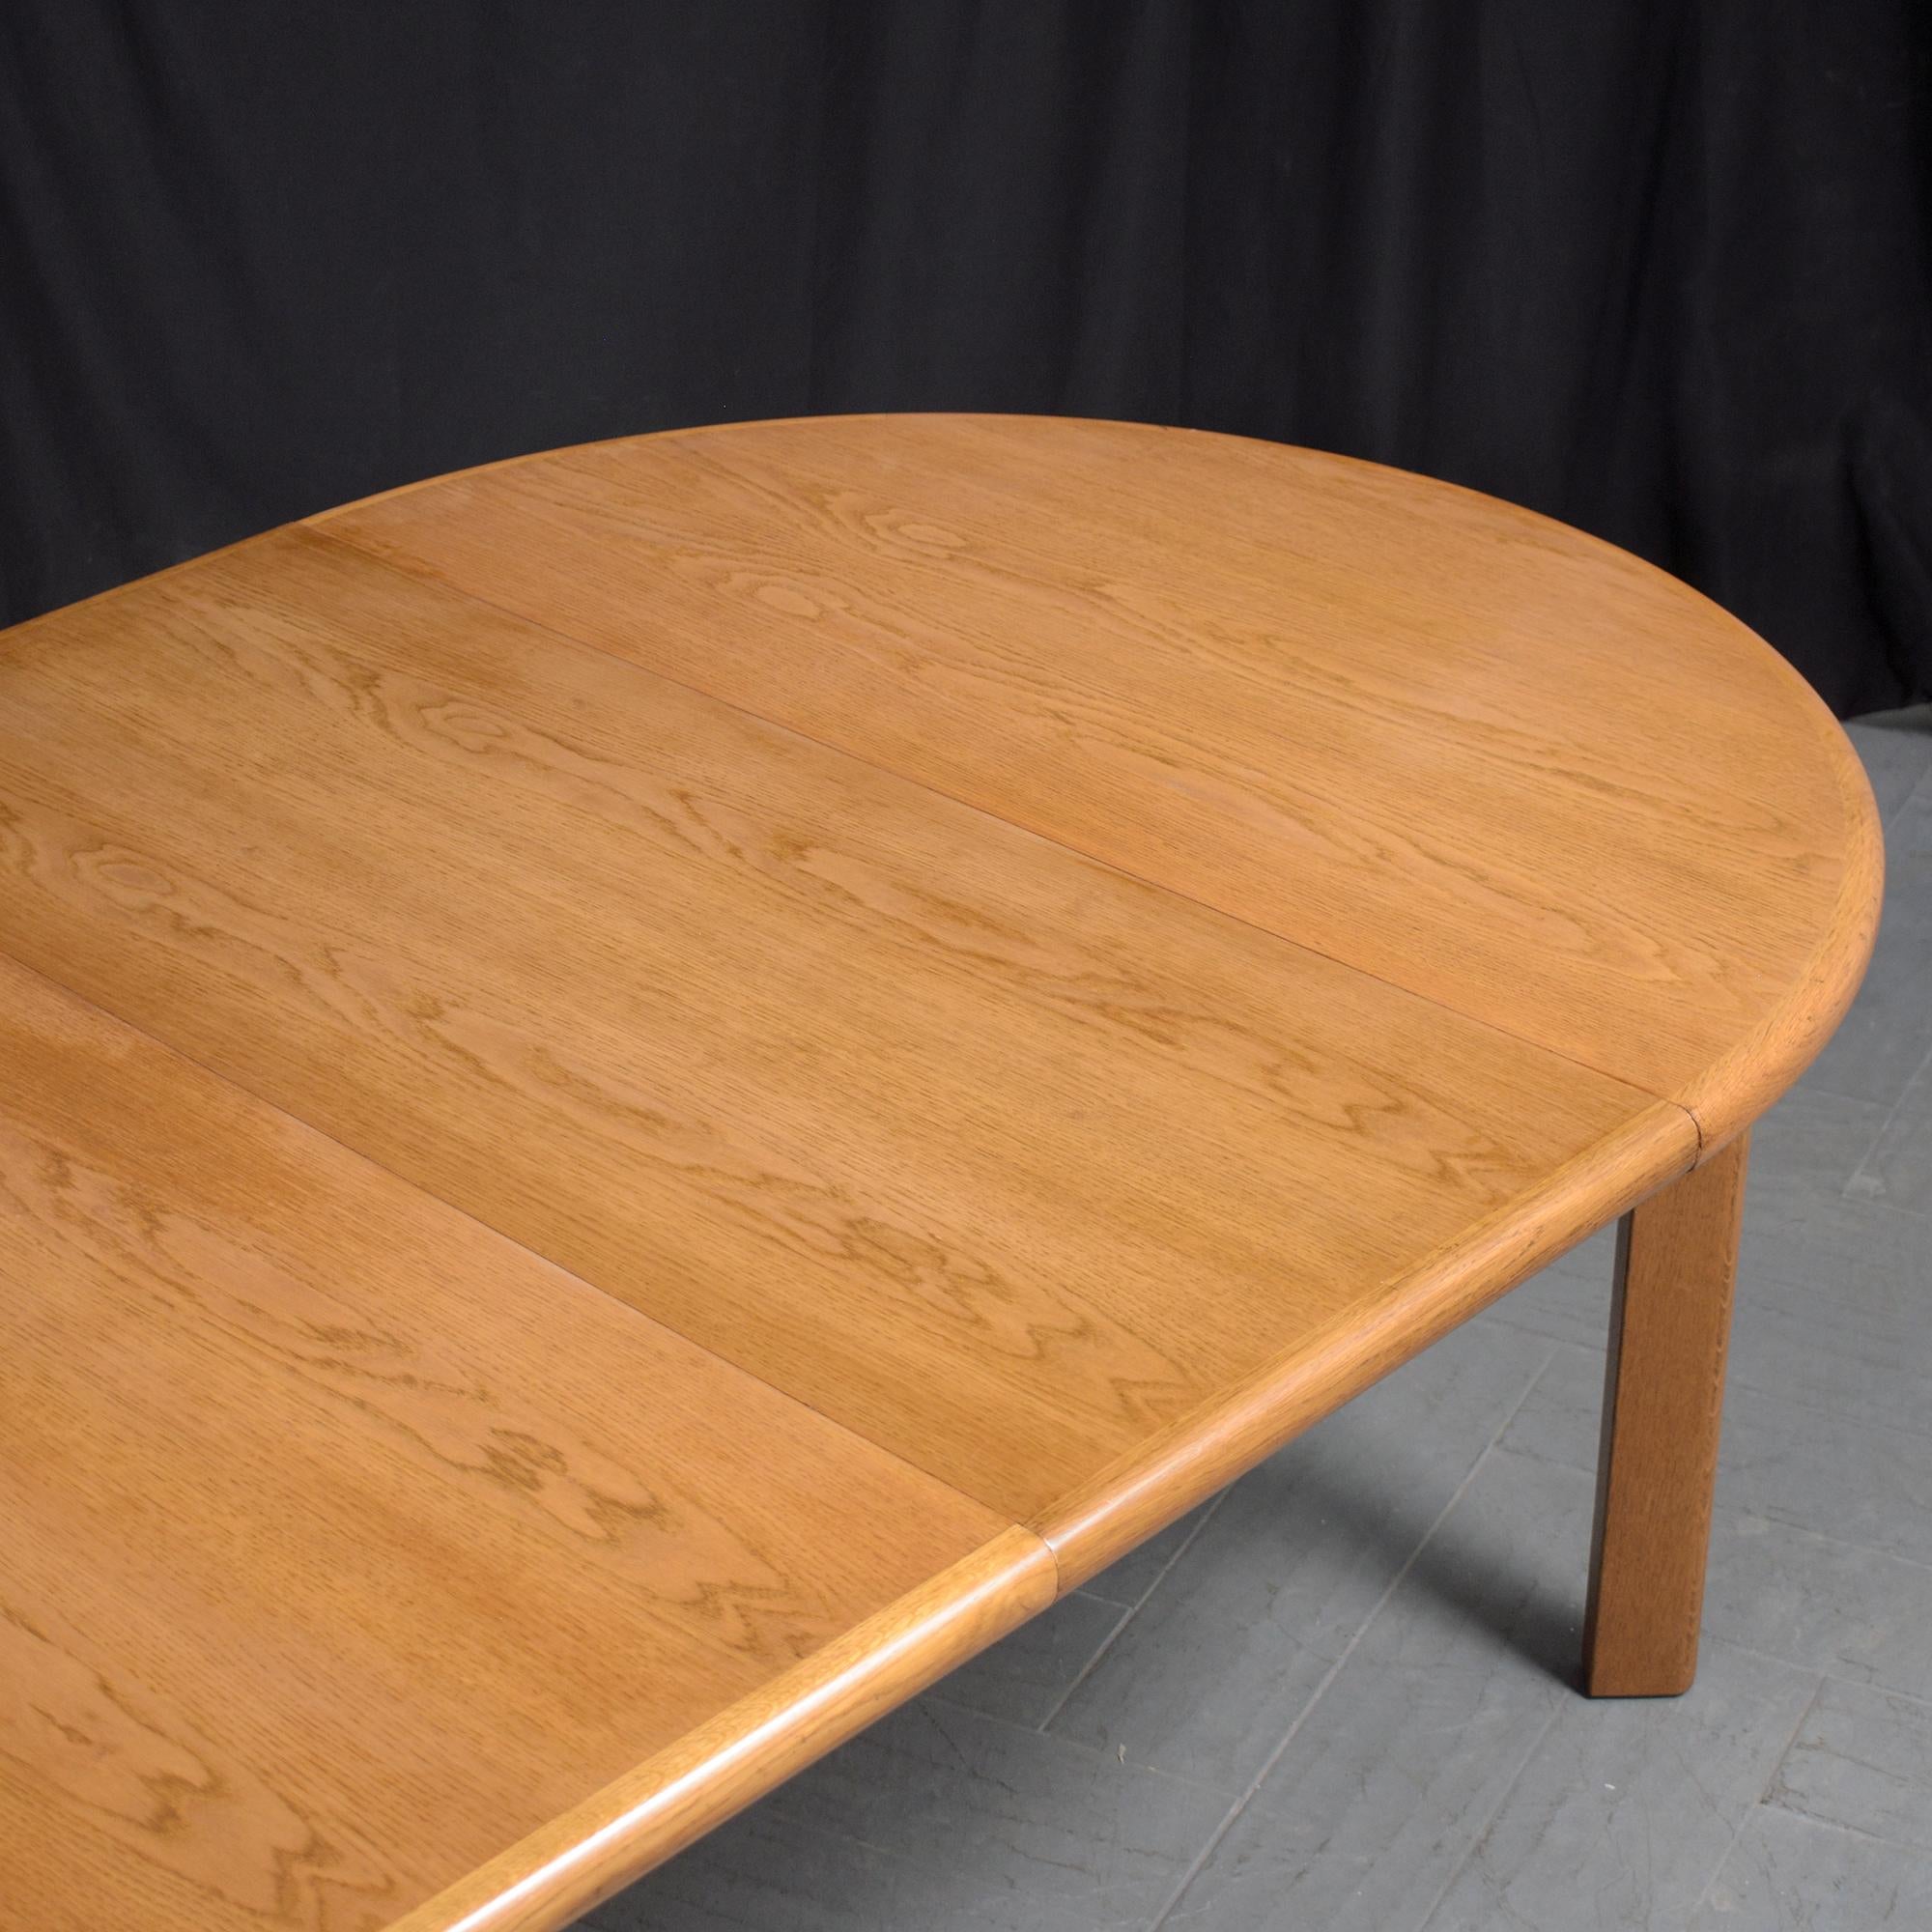 Mid-20th Century 1970s Danish Modern Teak Dining Table with Extendable Leaves For Sale